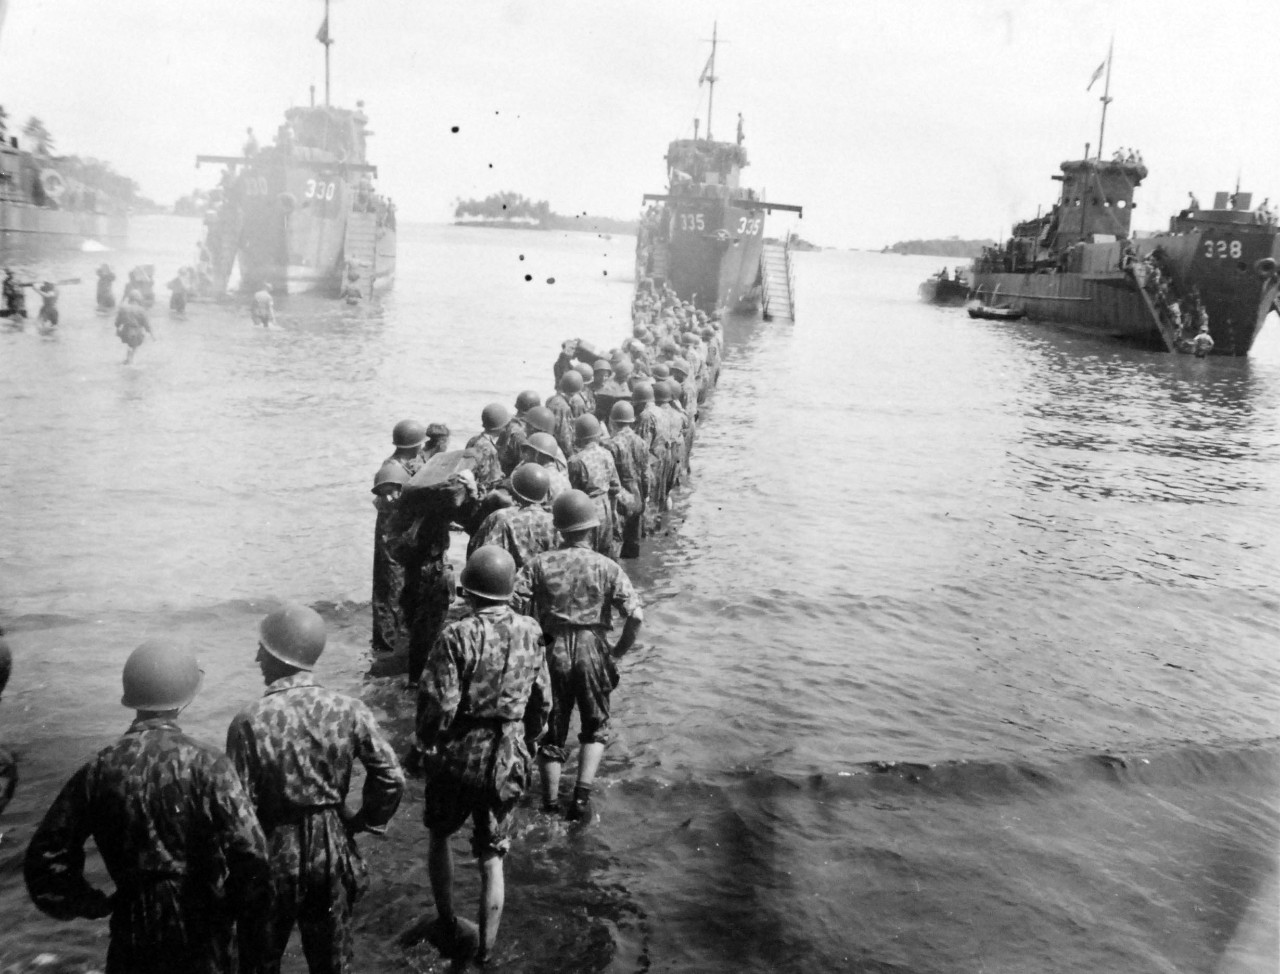 80-G-52705:   Rendova Island Invasion, June 30, 1943. Troops during the invasion aboard Landing Craft Infantry (Large), LCI (L) 330, LCI(L) 335 and LCI(L) 328.   Official U.S. Navy Photograph, now in the collections of the National Archives.  (2018/04/04).  